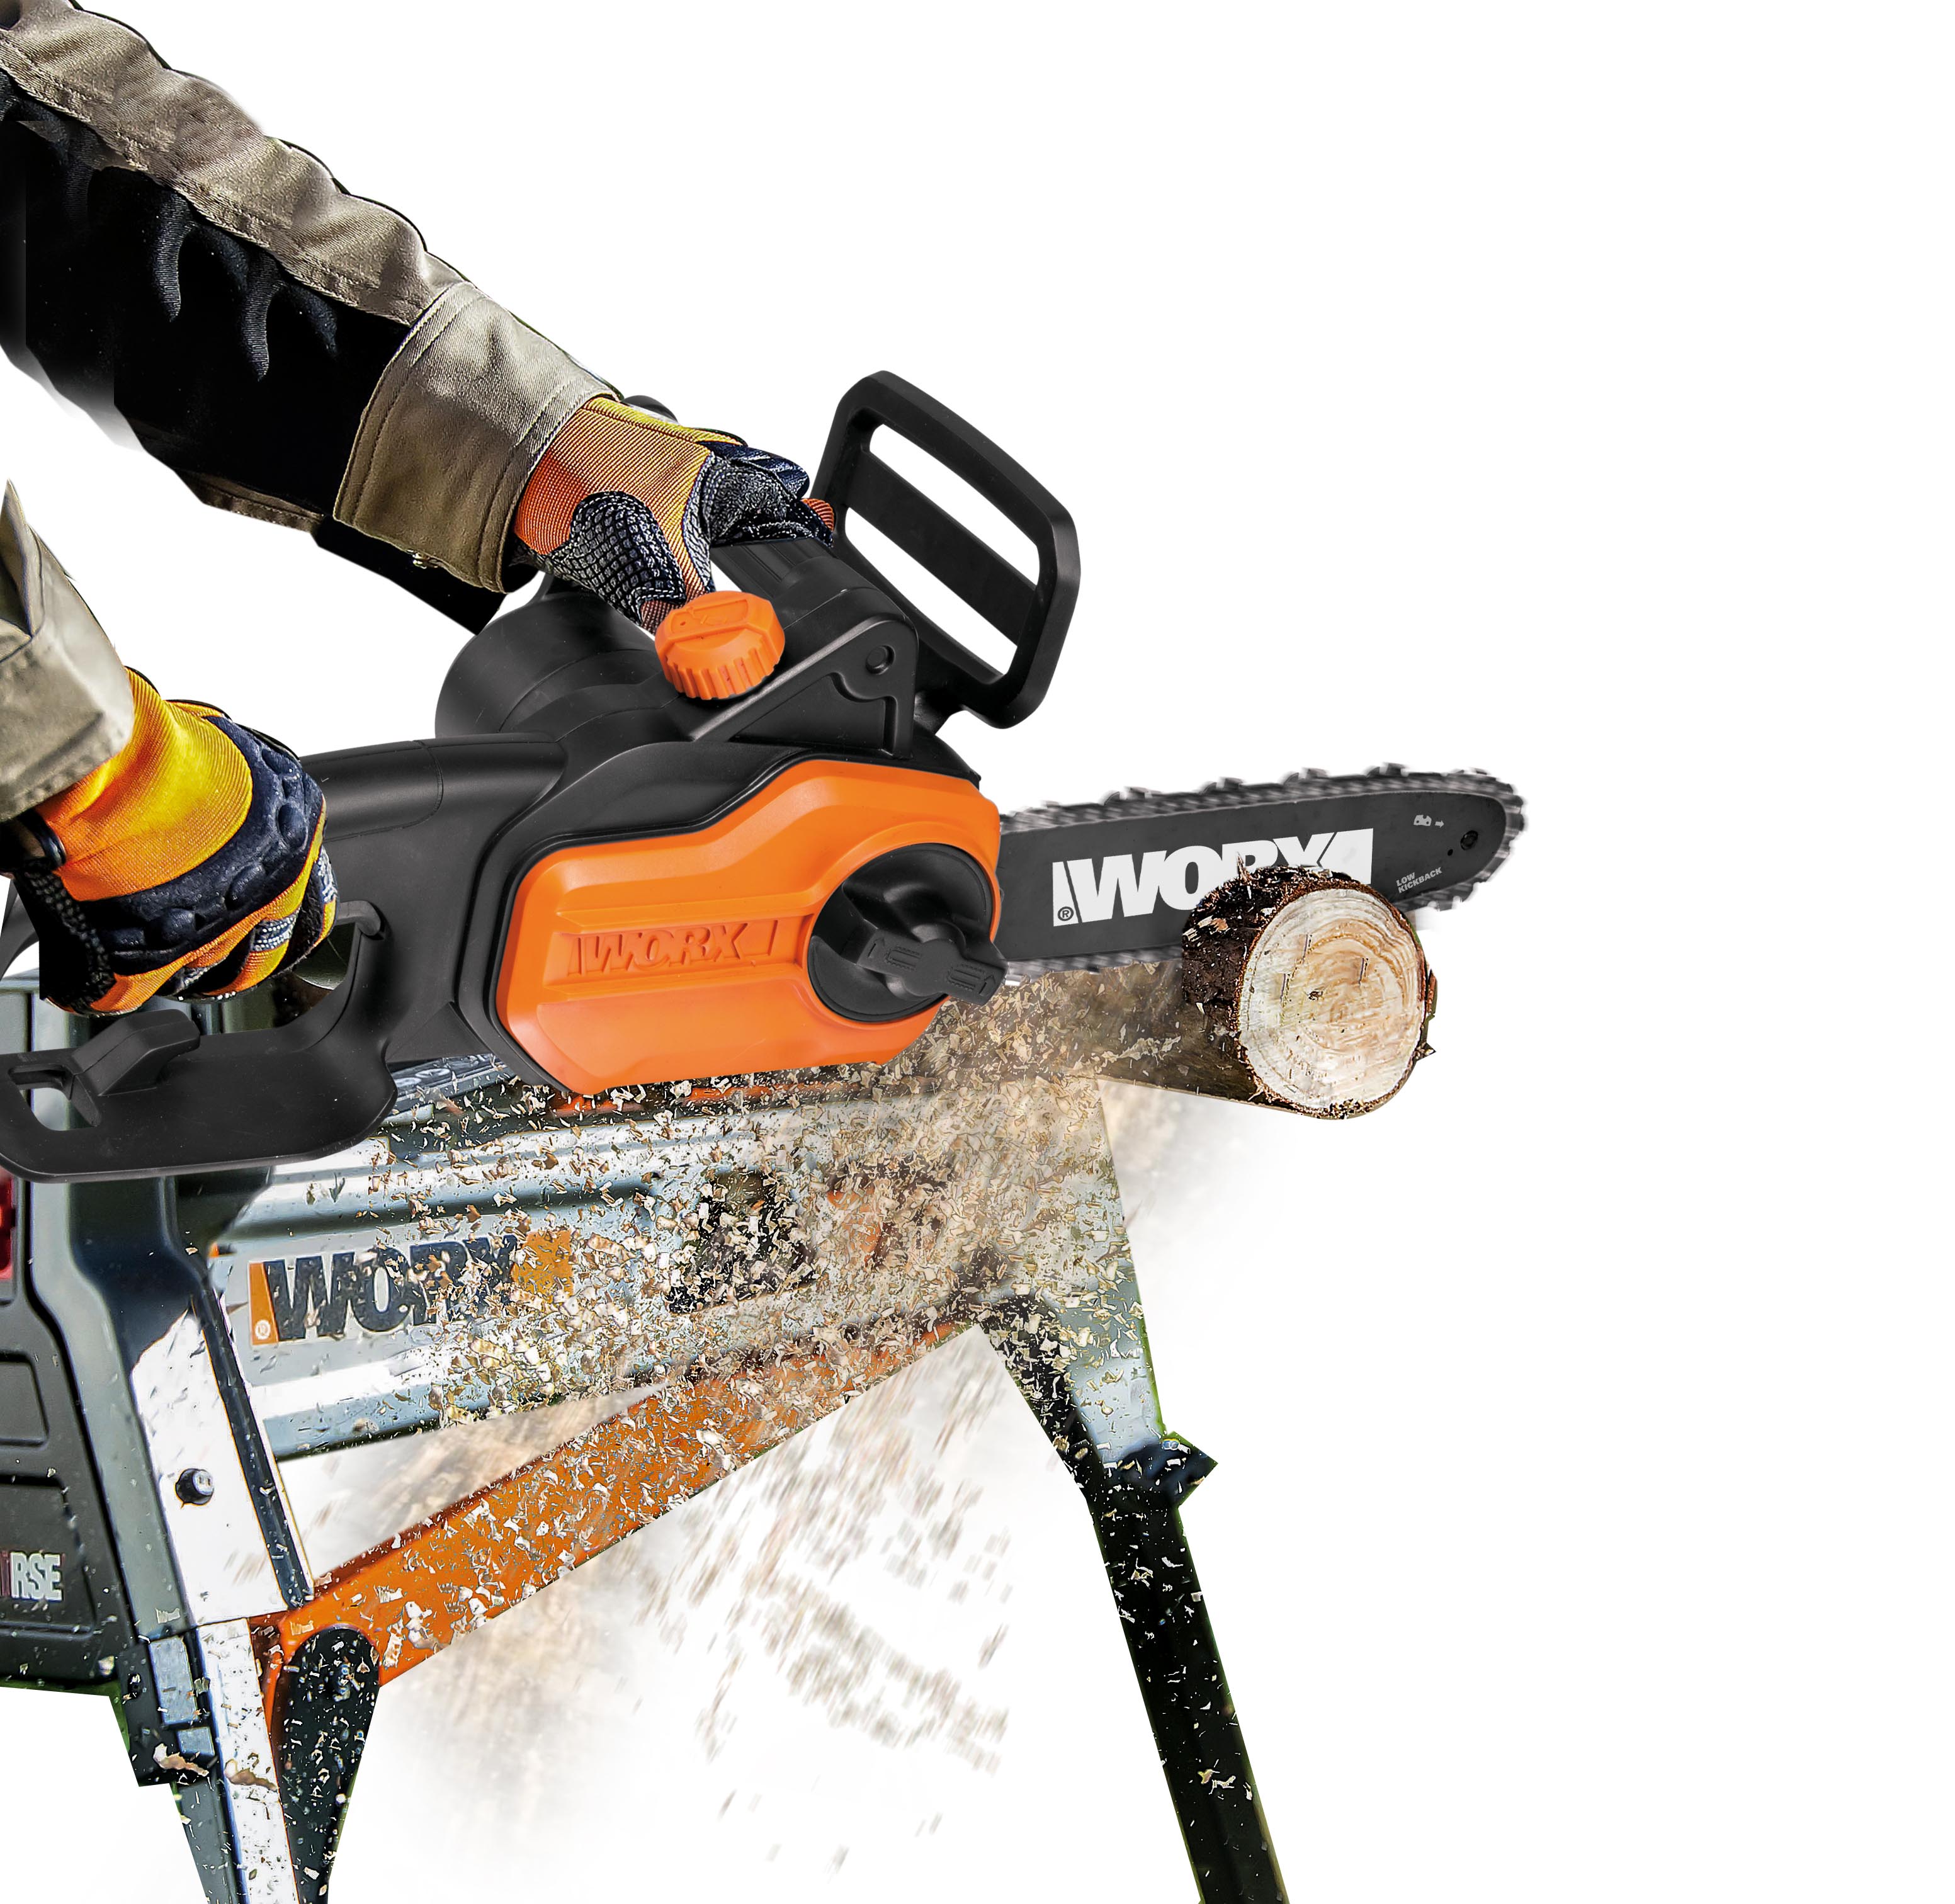 The 2-in-1 yard tool detaches without tools from its extension pole for yard clean-up or cutting firewood.